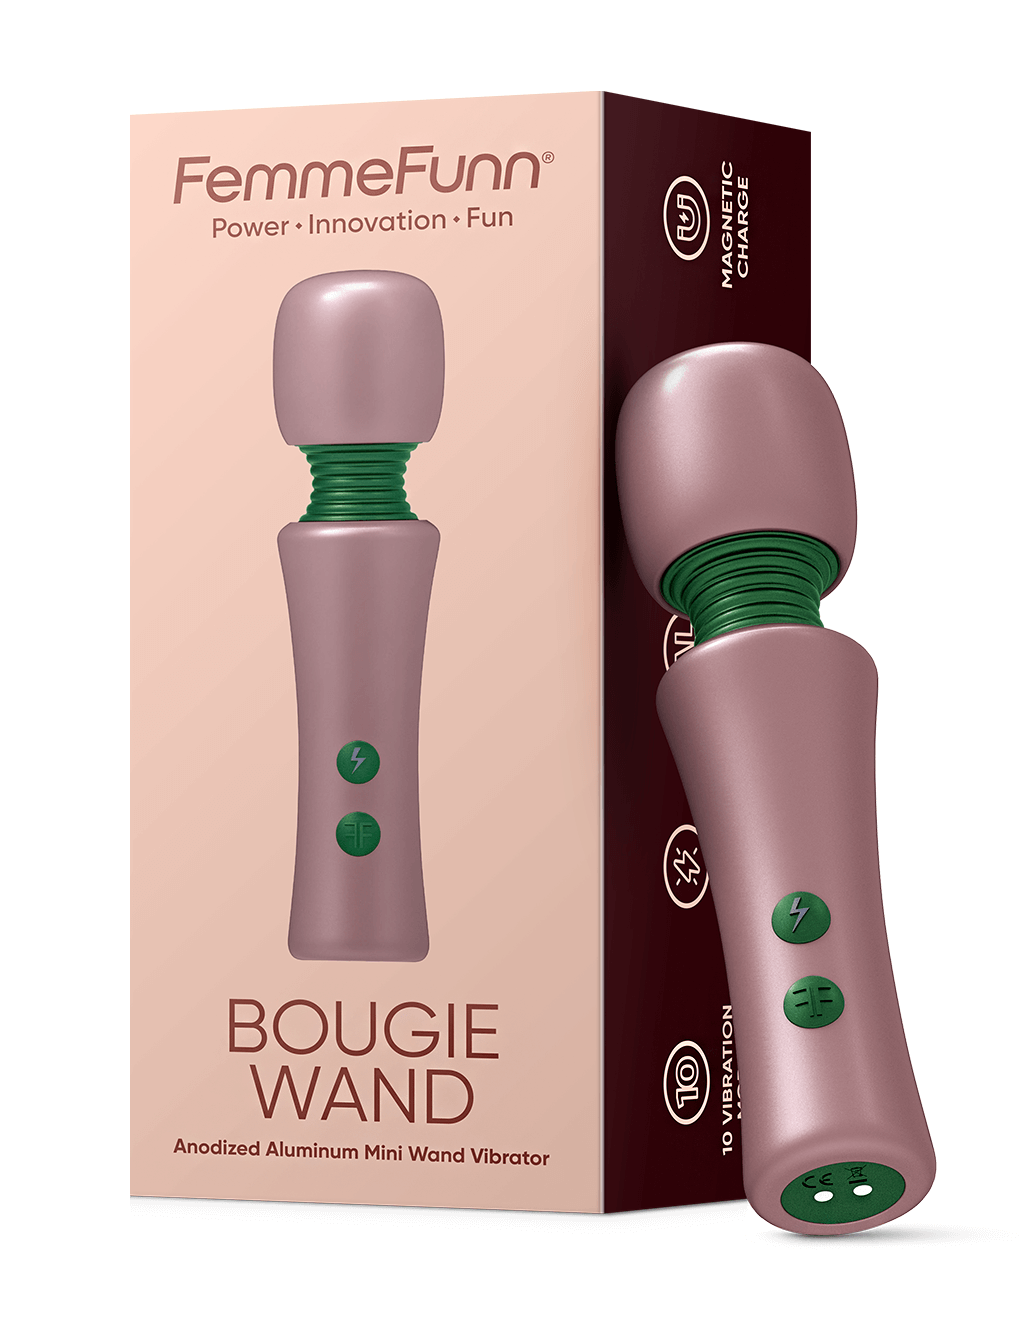 Femme Funn Bougie Wand - Rose Gold - Product w/Box